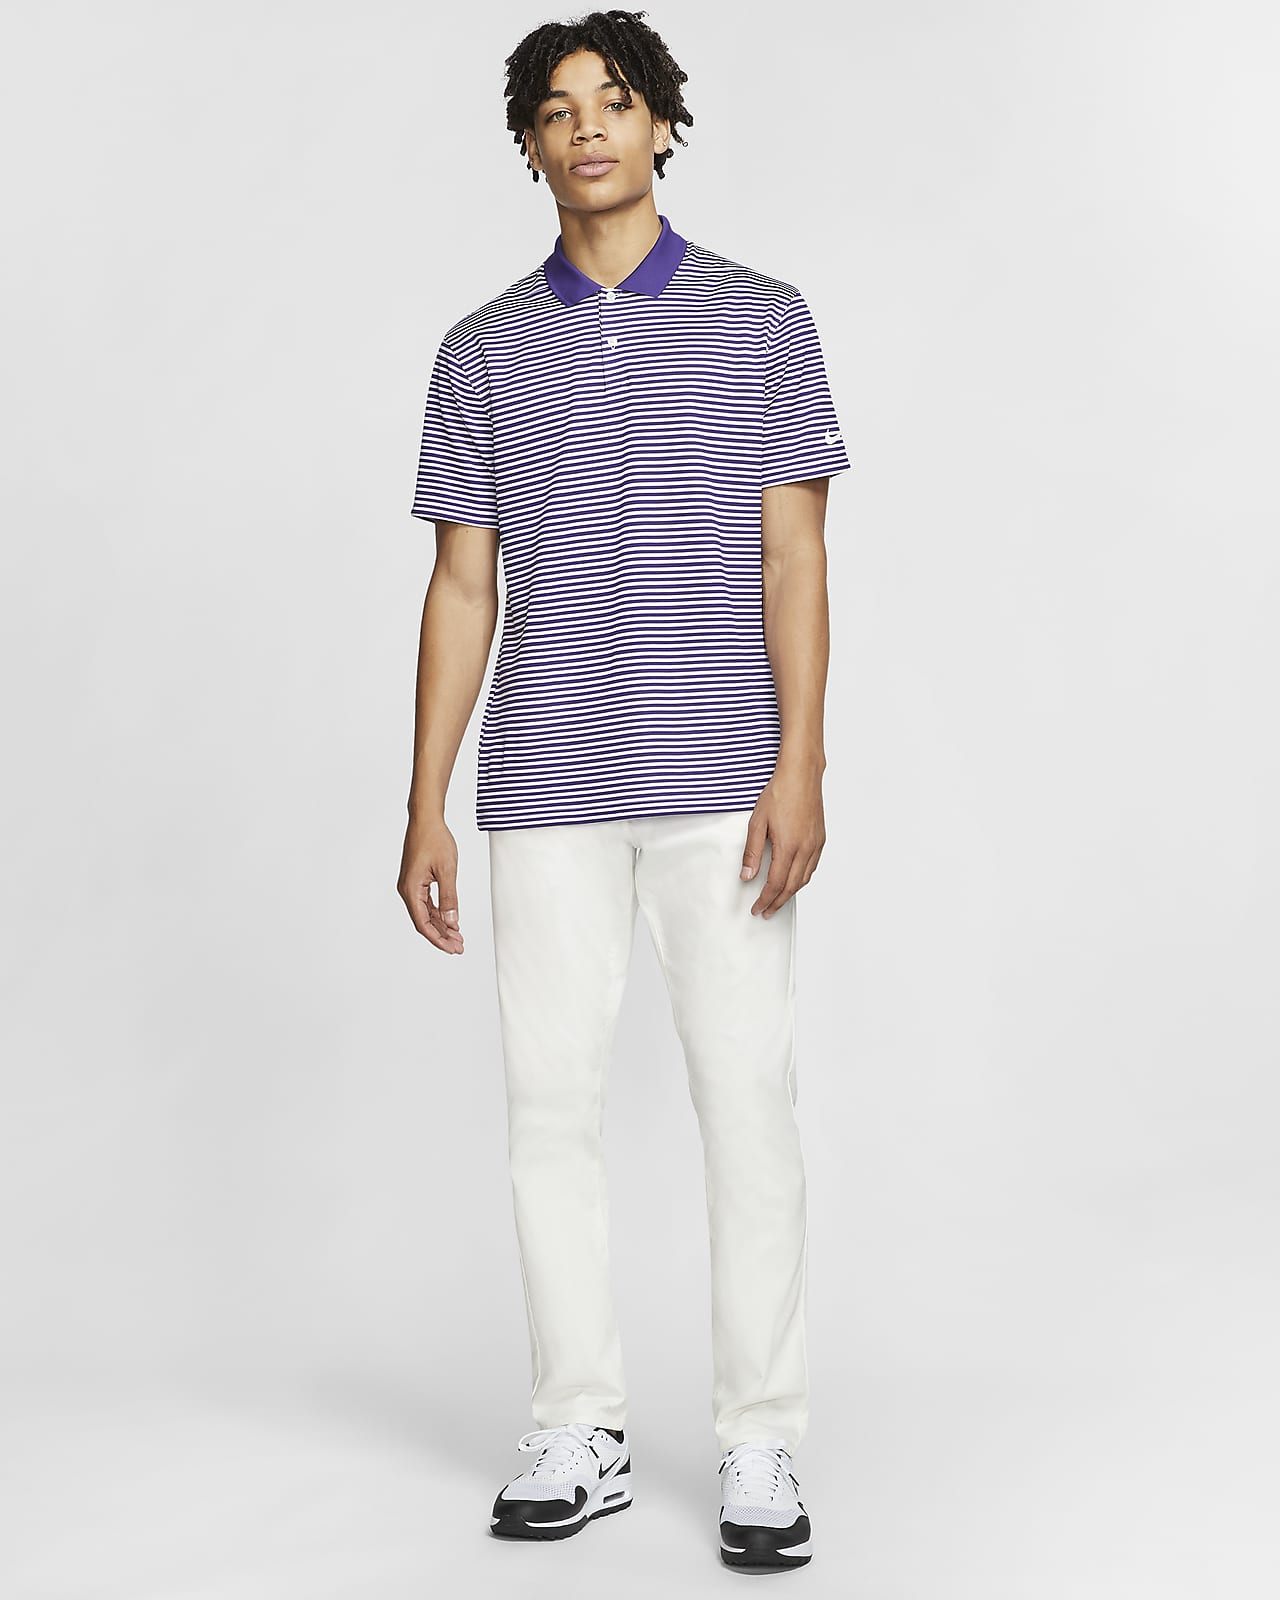 nike men's dry victory polo